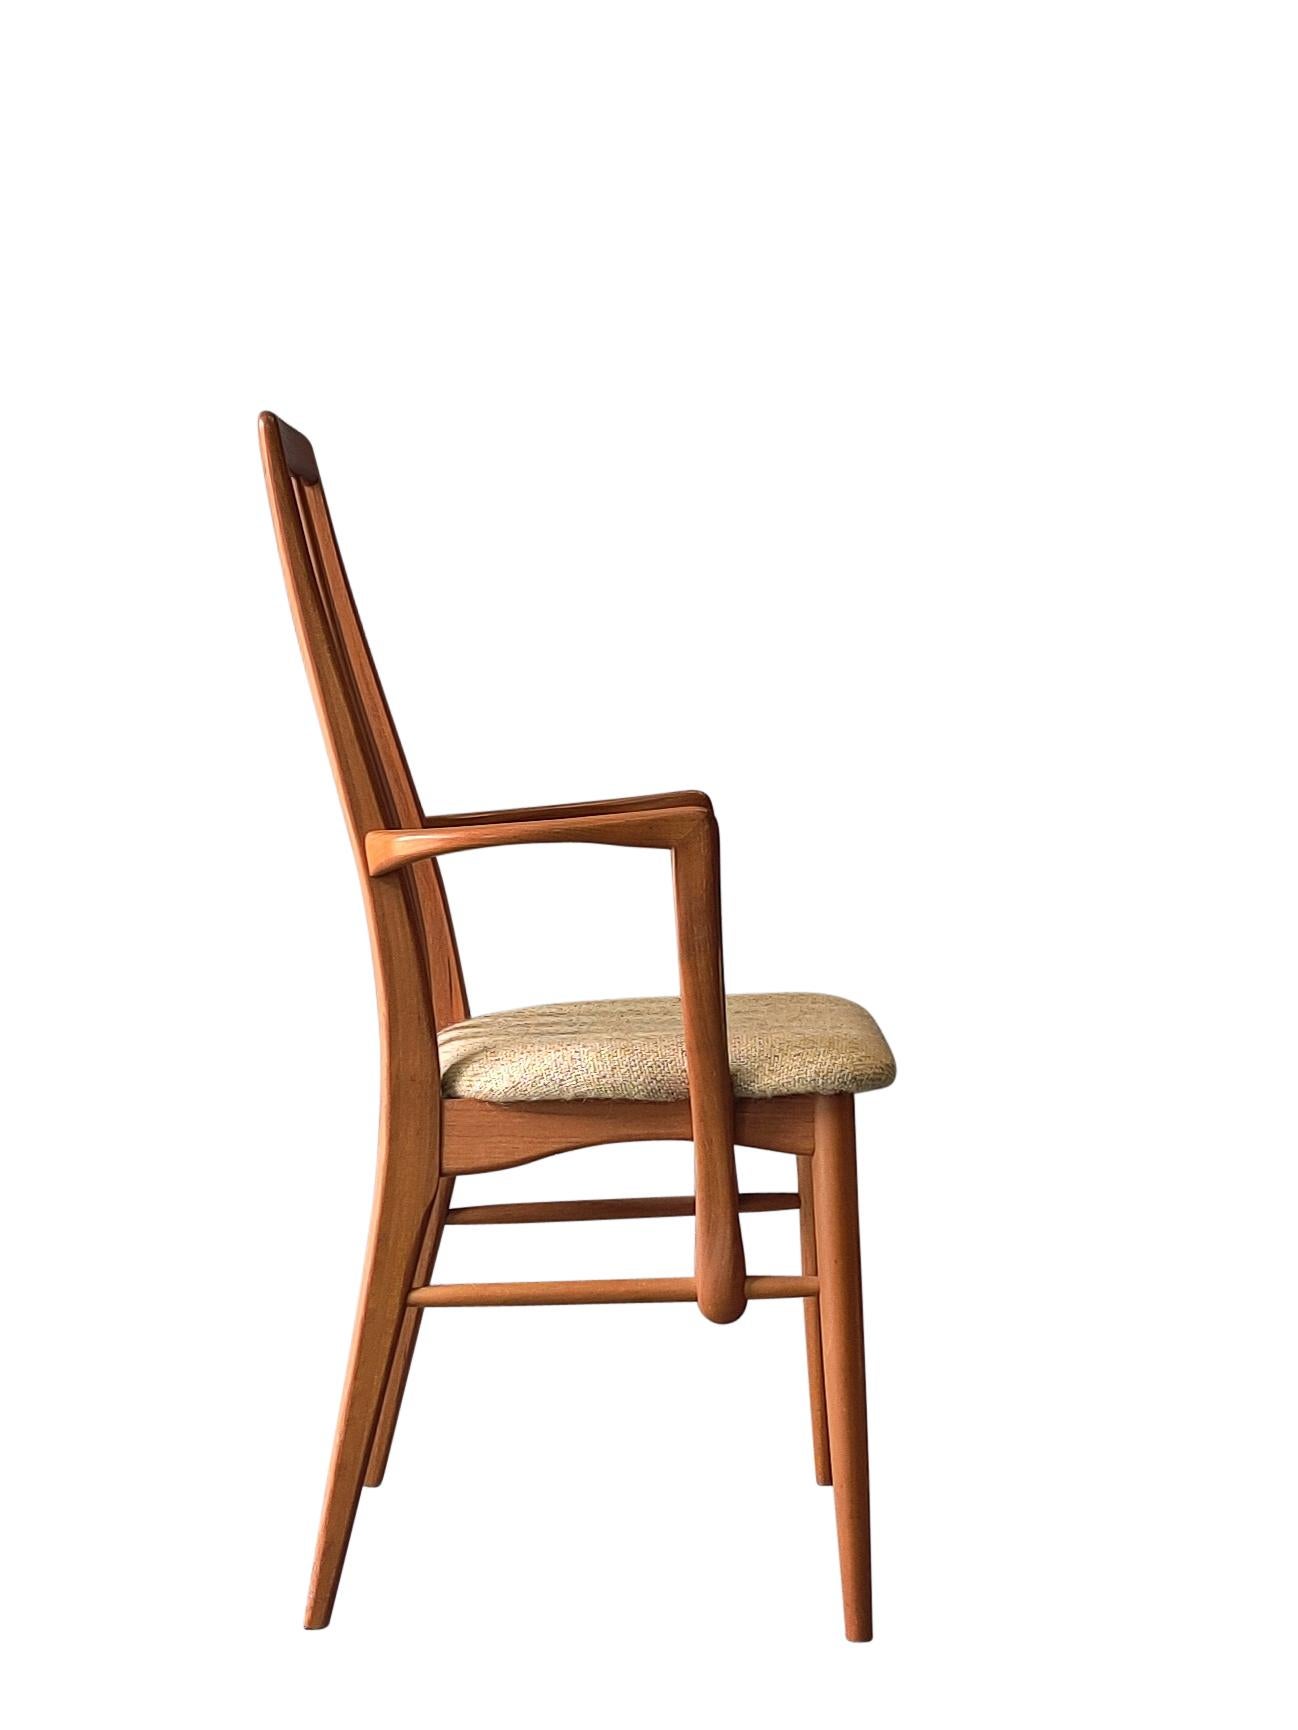 Mid-20th Century Vintage Danish Set of Six Teak Eva Dining Chairs by Niels Koefoed 2 Arms 4 Sides